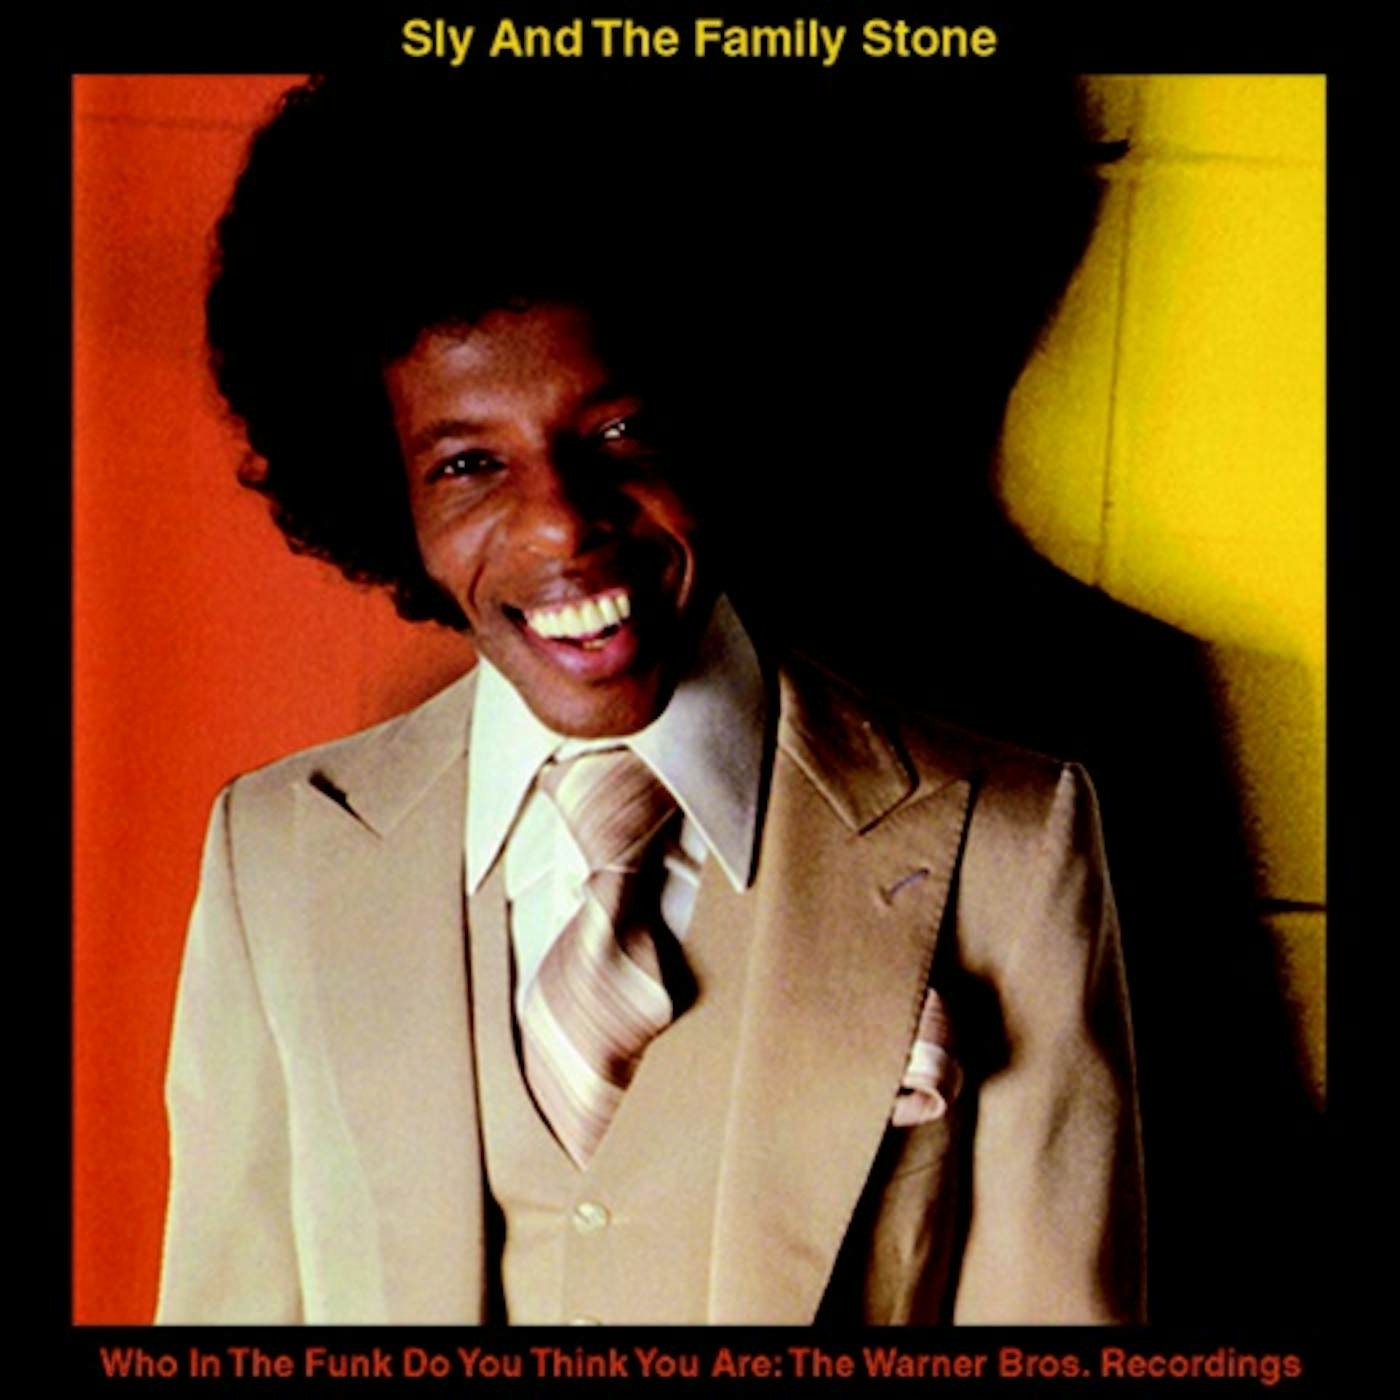 Sly & The Family Stone WHO IN THE FUNK DO YOU THINK YOU ARE: WARNER BROS. CD